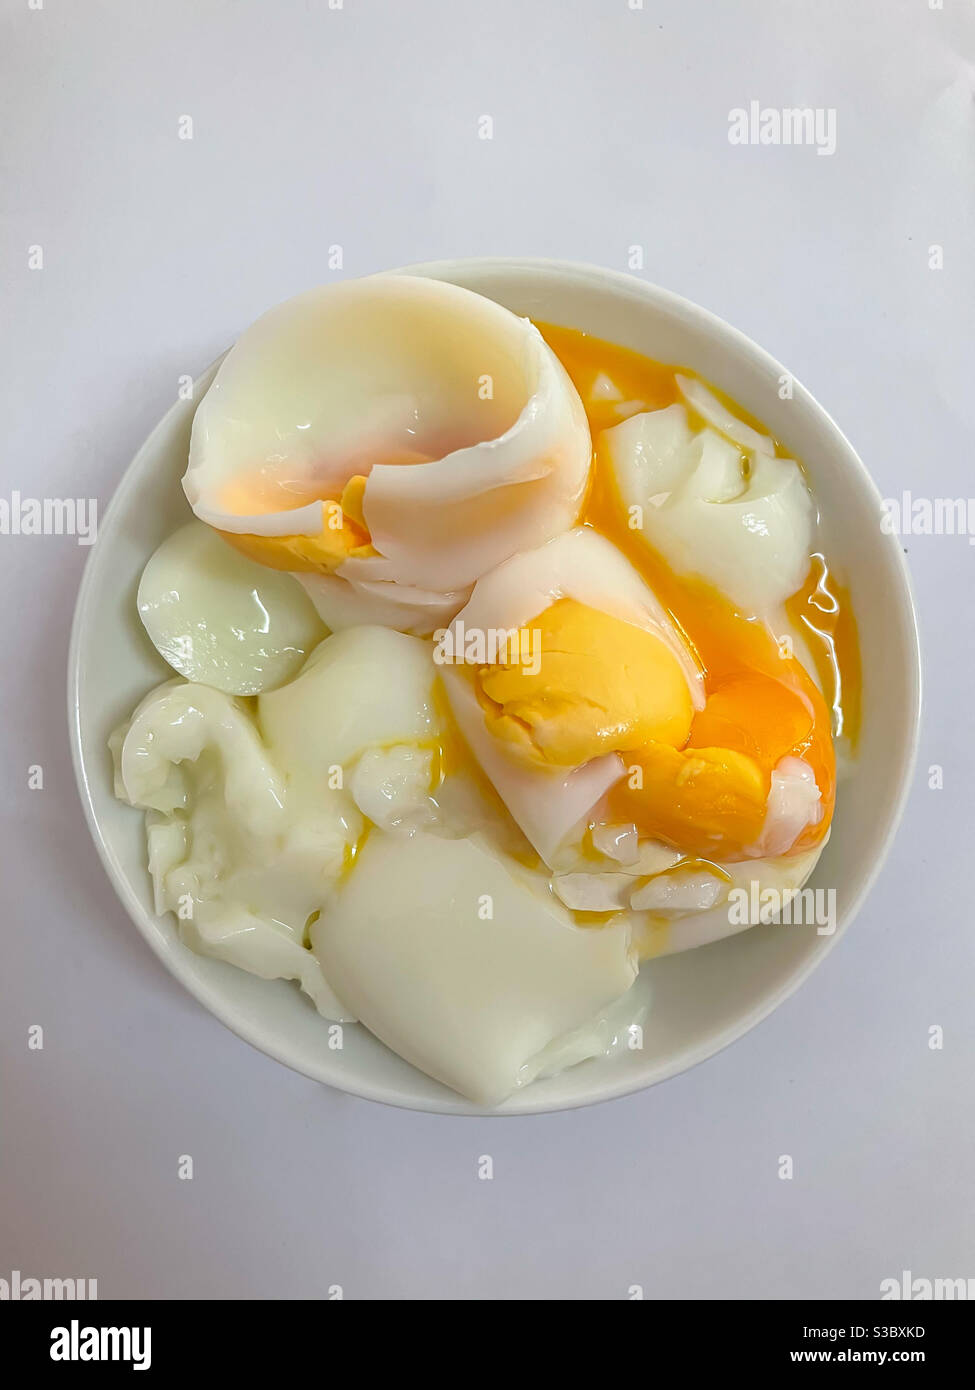 Half boiled eggs served in a small white bowl. Stock Photo